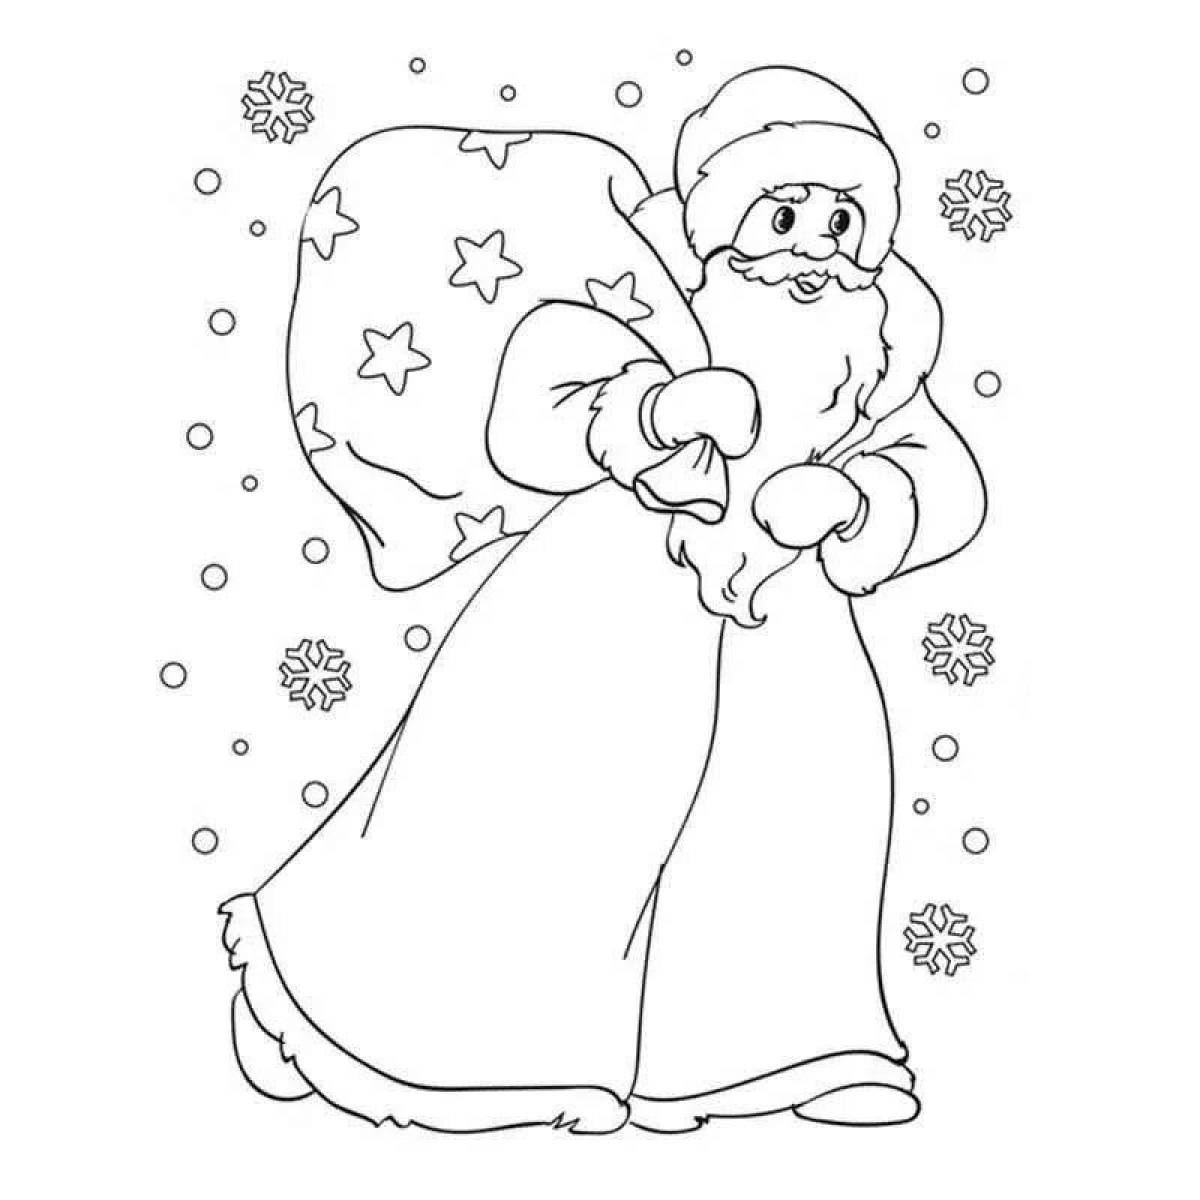 Shiny Santa Claus and Snow Maiden Christmas Coloring Pages